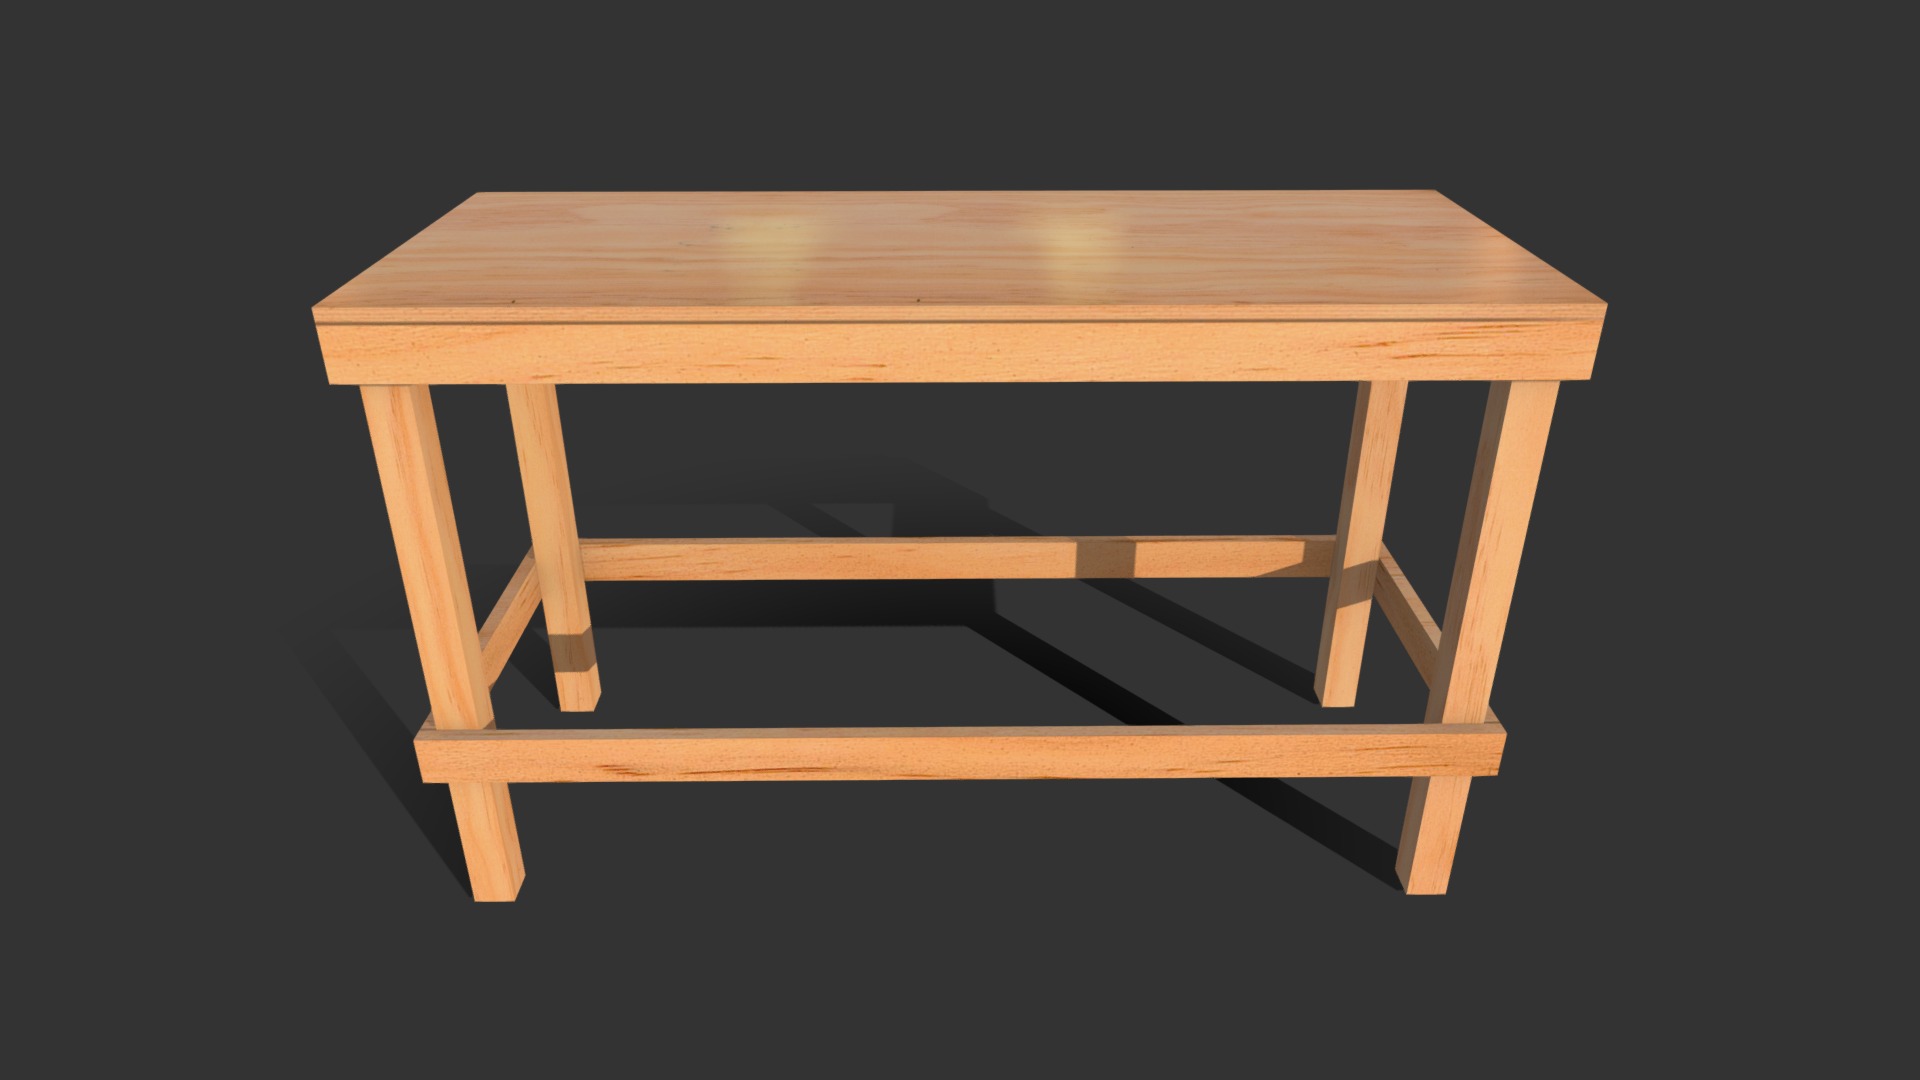 3D model Table – Pine and ply construction site element - This is a 3D model of the Table - Pine and ply construction site element. The 3D model is about a wooden table with a black background.